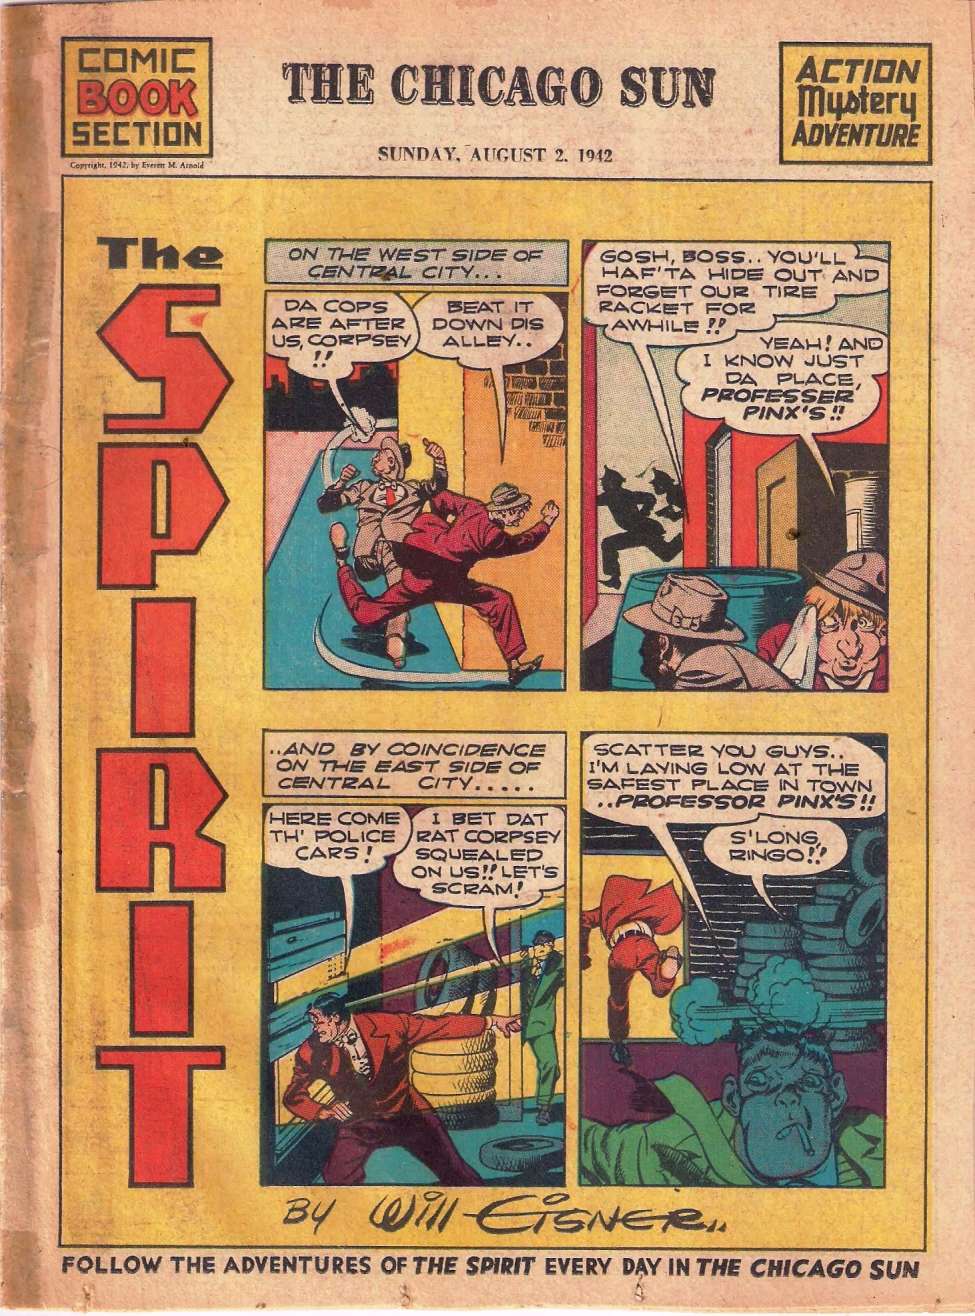 Book Cover For The Spirit (1942-08-02) - Chicago Sun